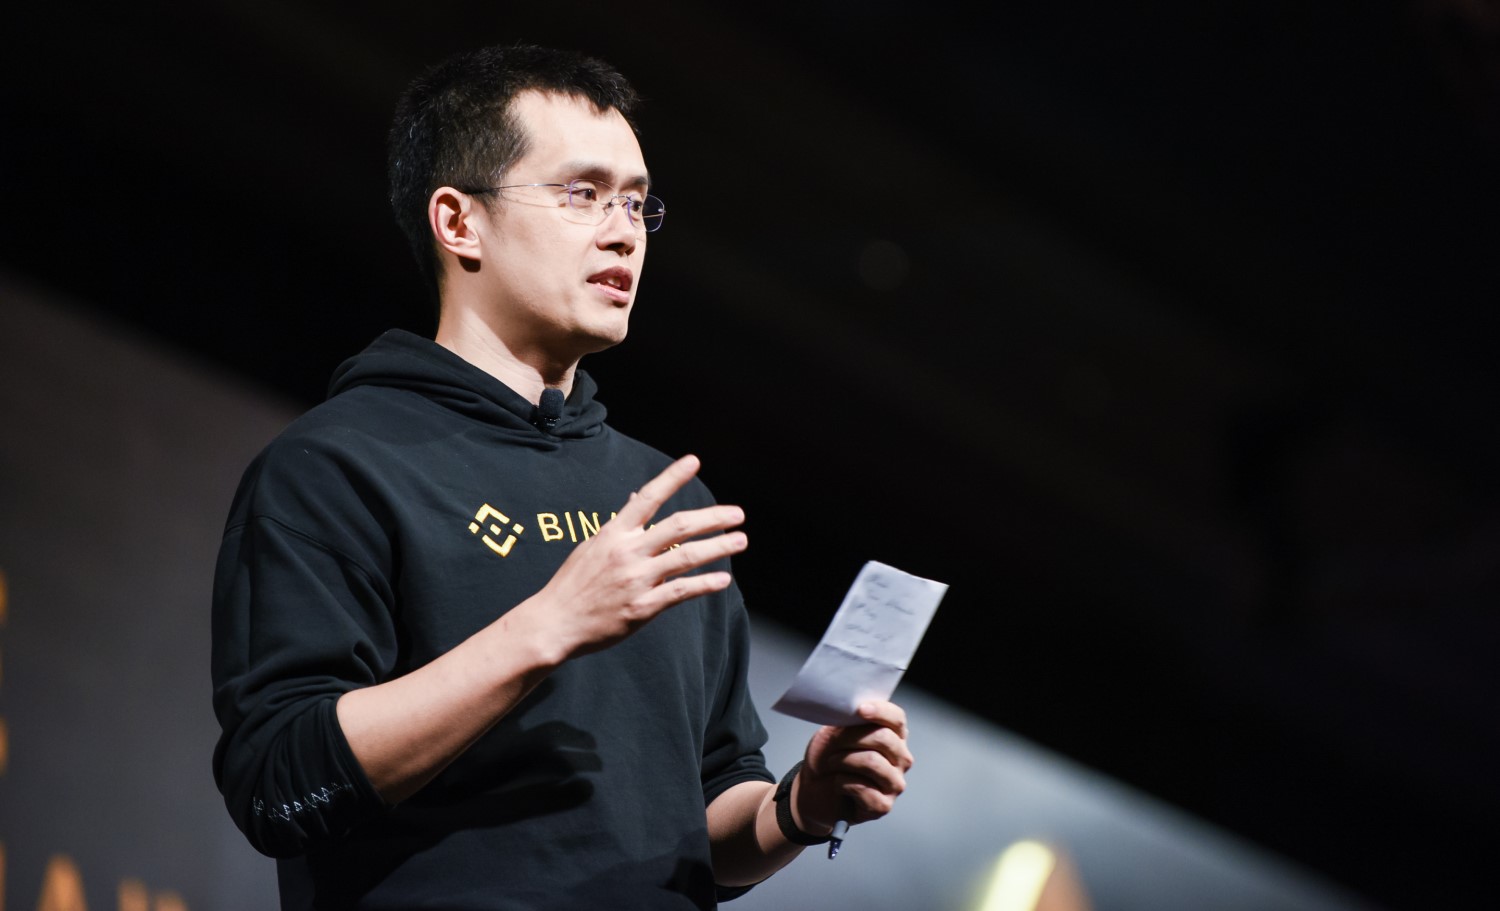 Security Researcher Tears Up A Binance Scam Site To Find The Hackers